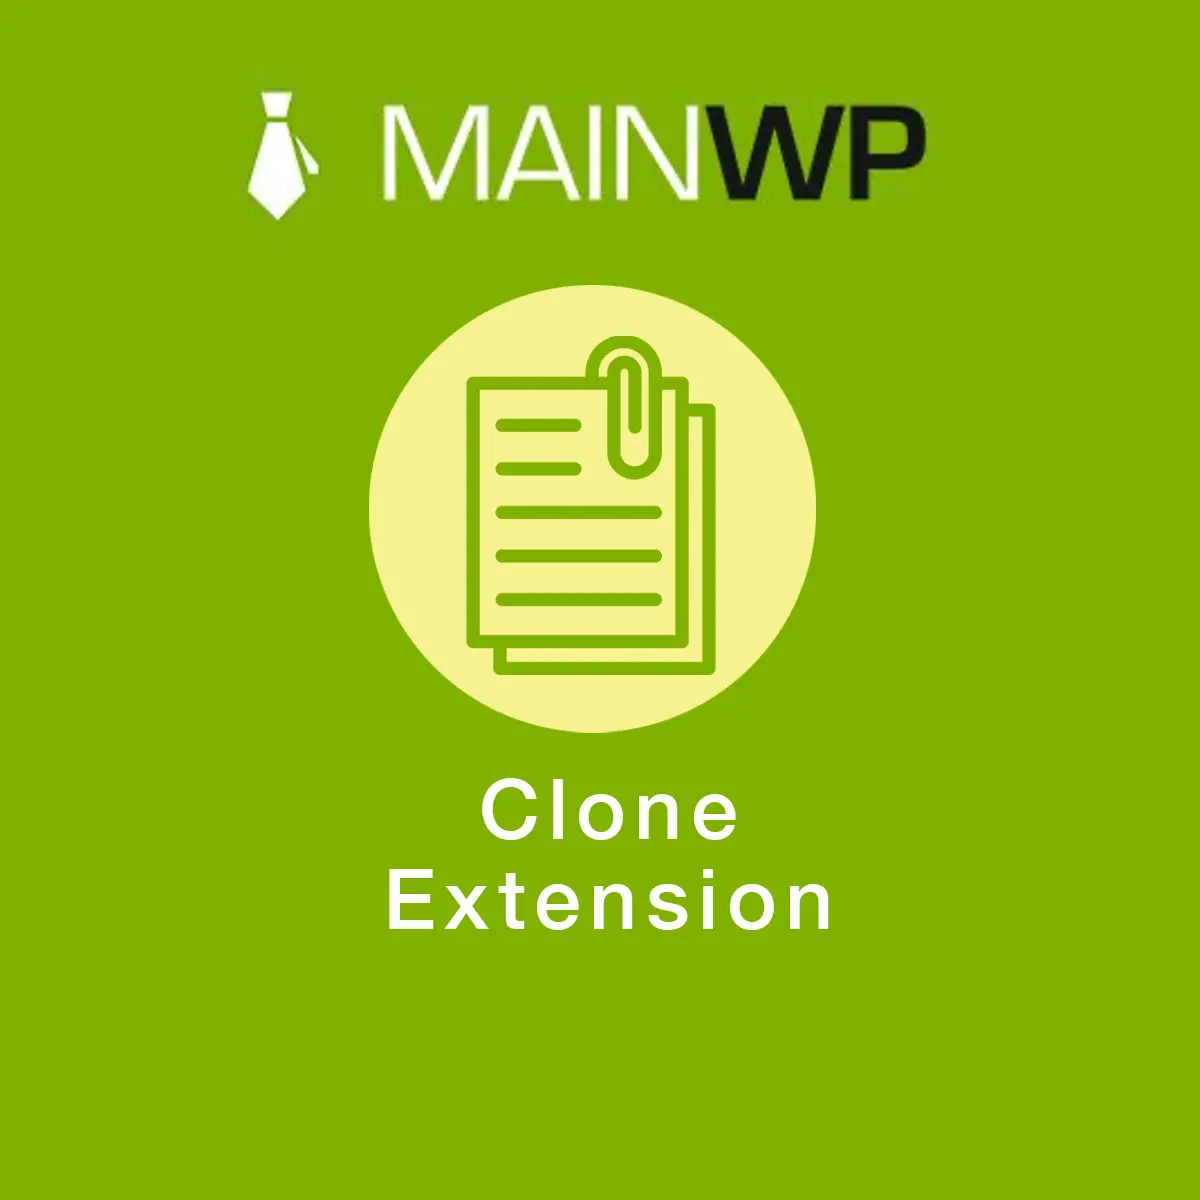 Download MainWP Clone Extension